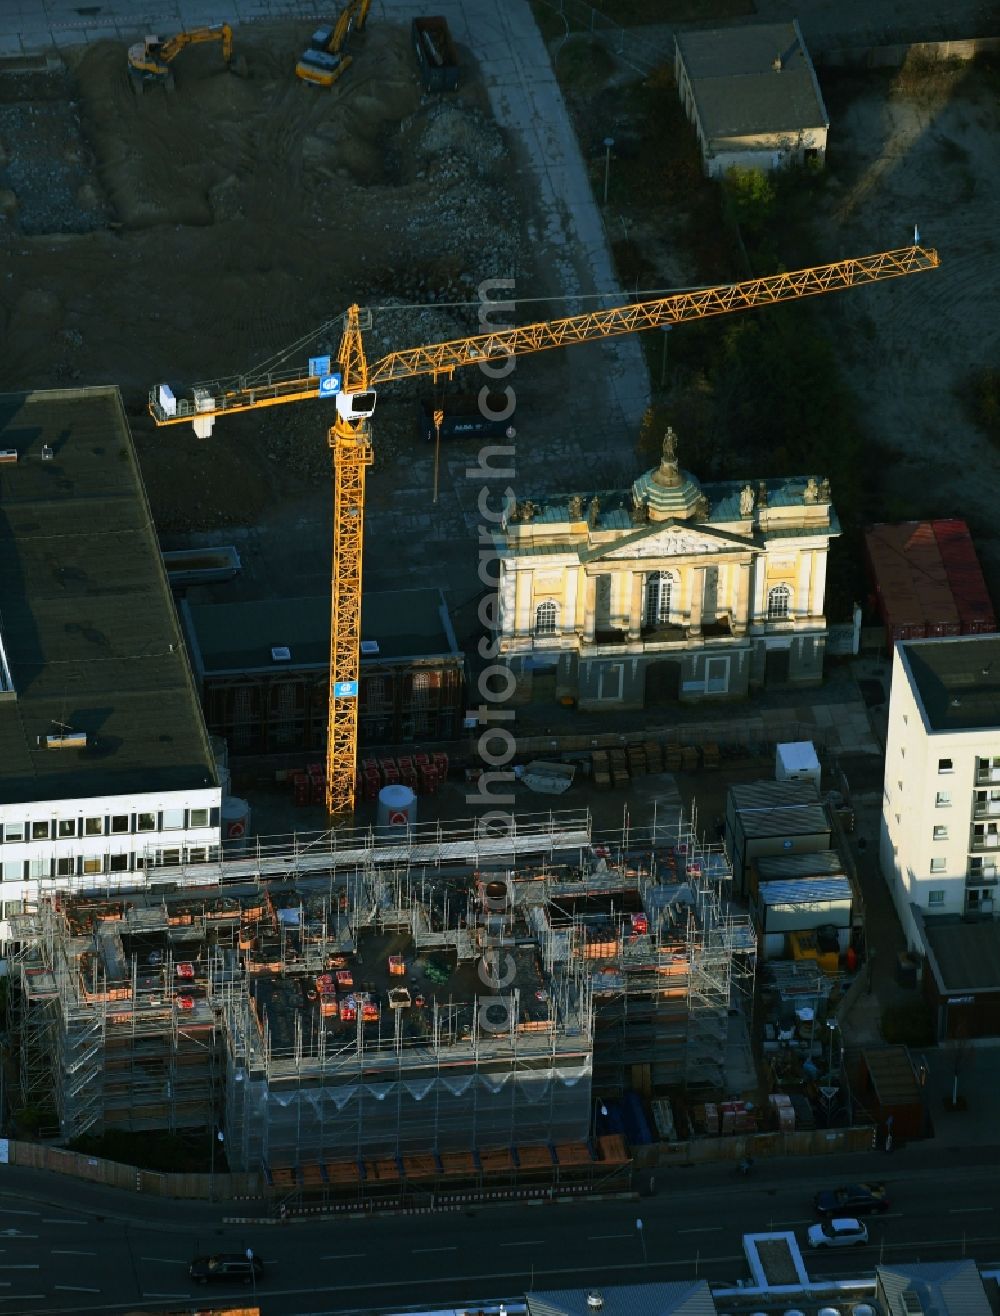 Aerial image Potsdam - Construction site for the reconstruction of the garrison church Potsdam in Potsdam in the federal state of Brandenburg, Germany